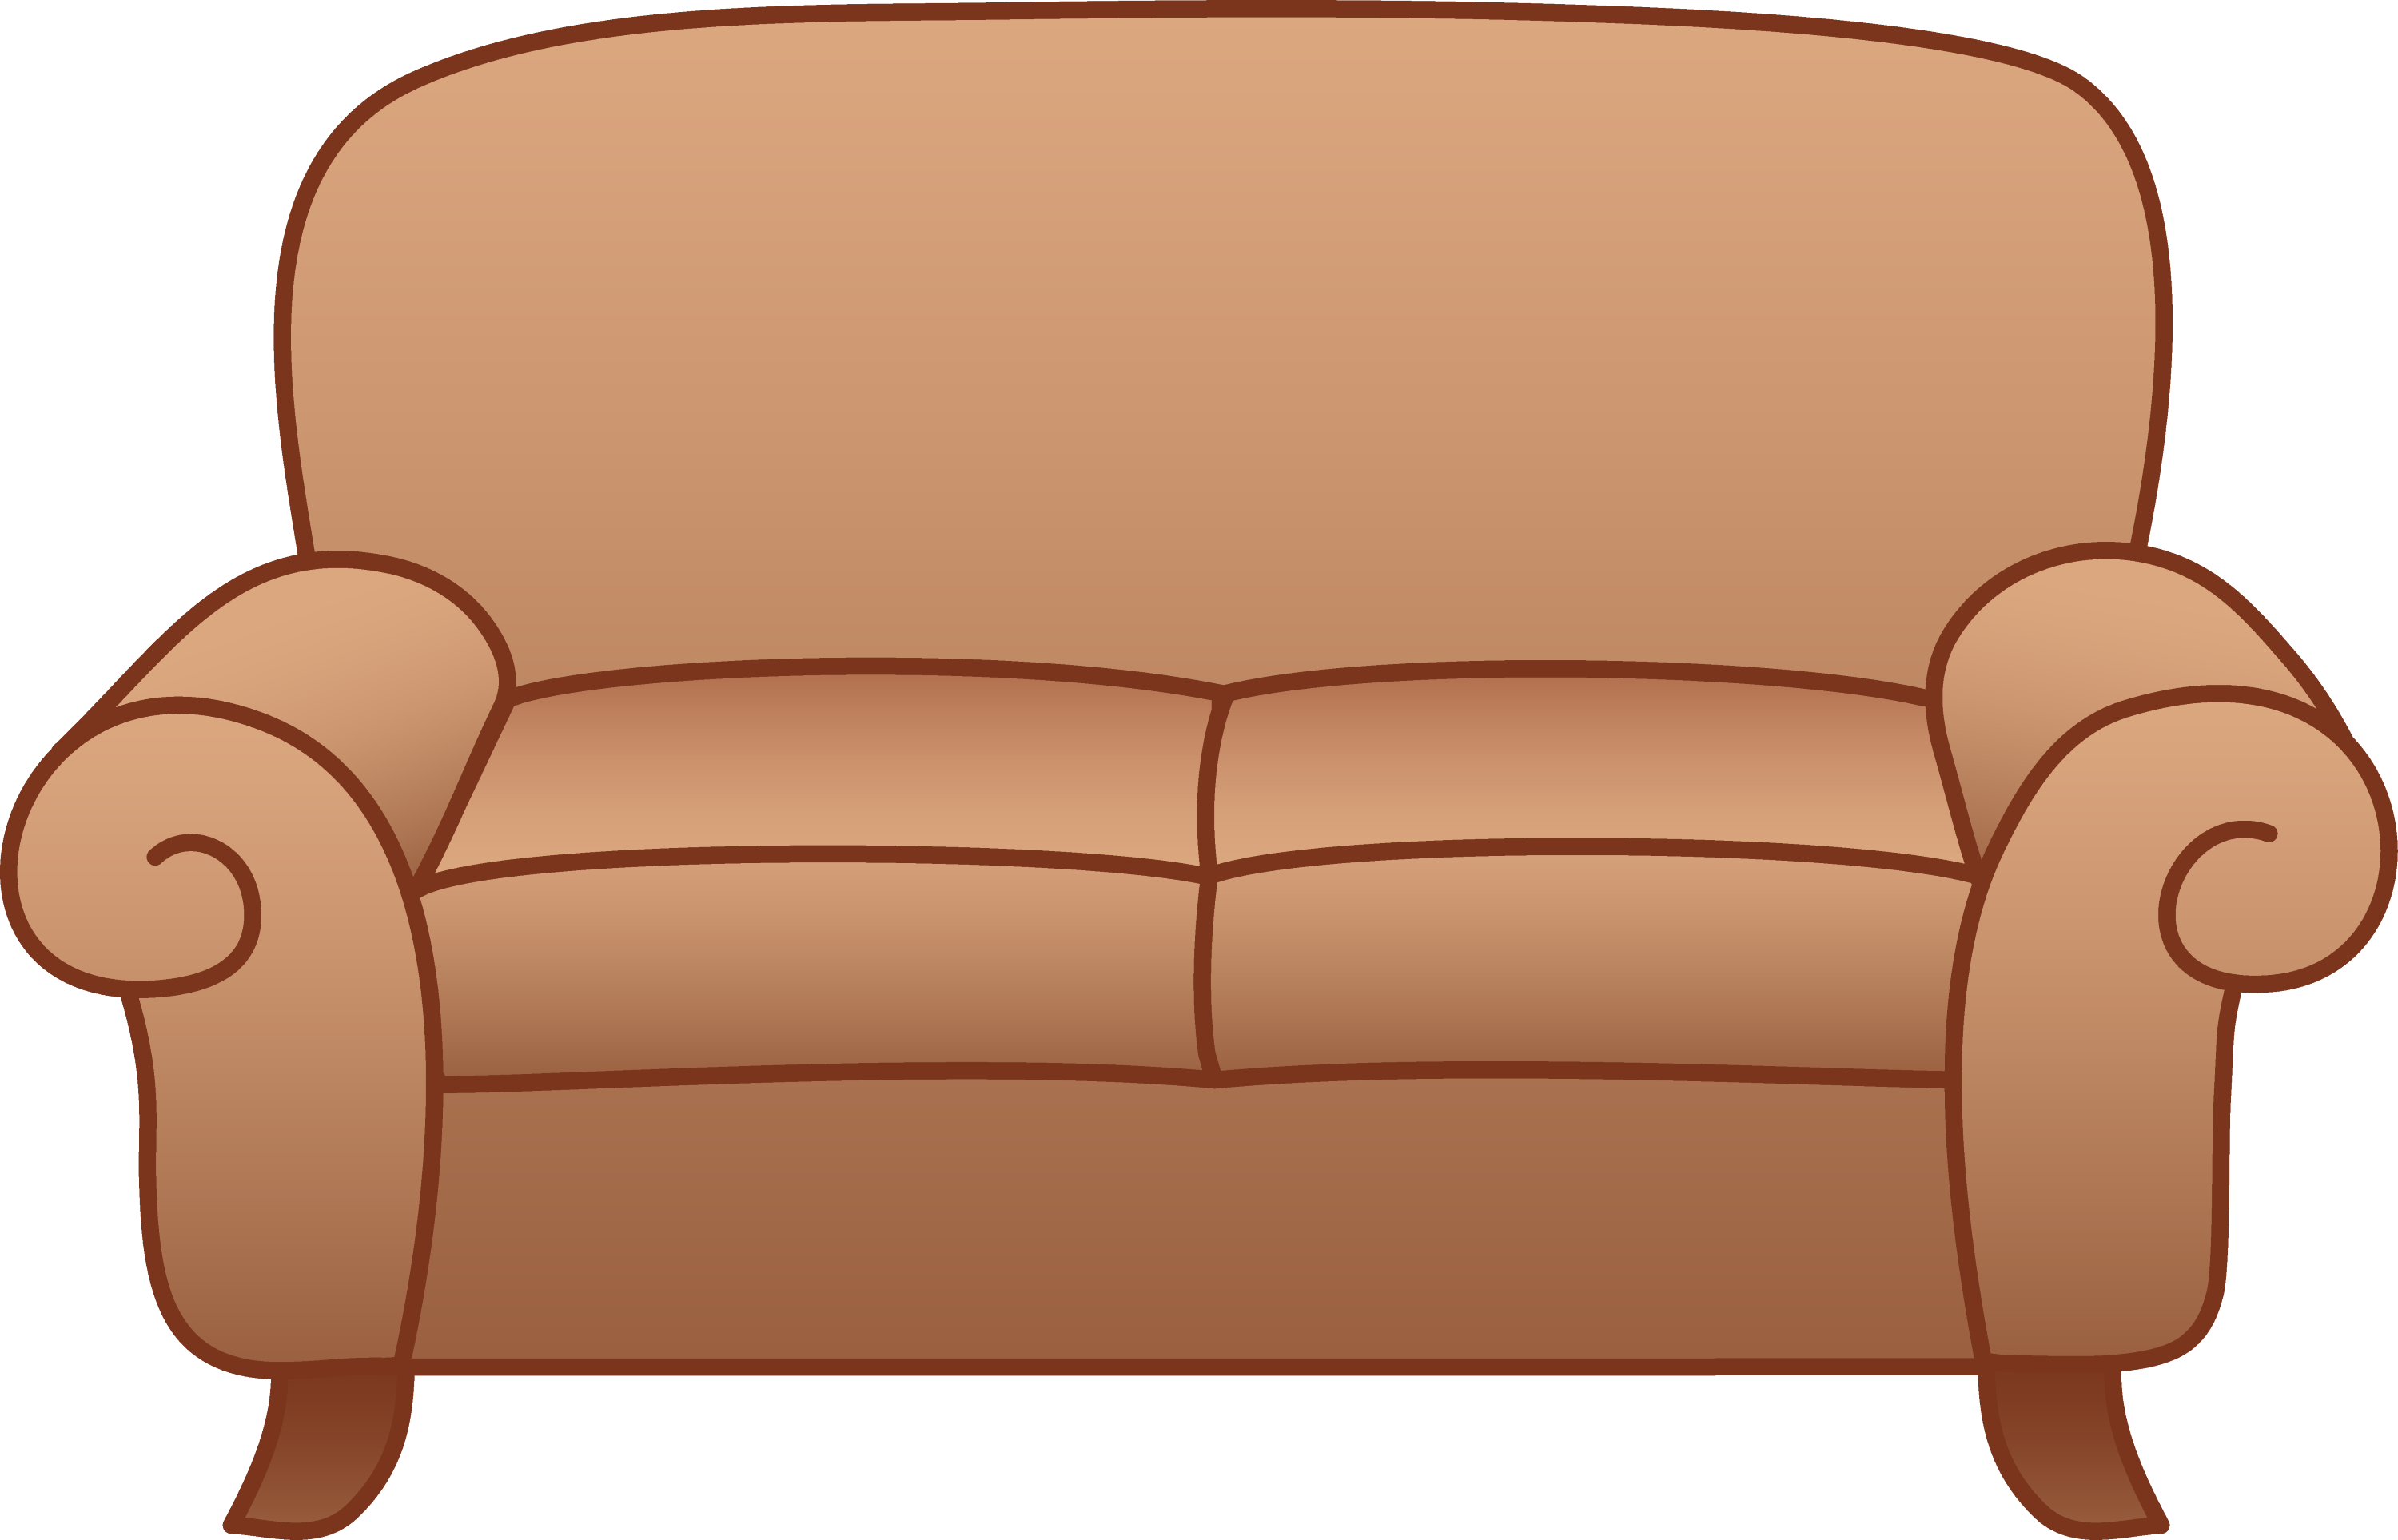 furniture clipart images - photo #28